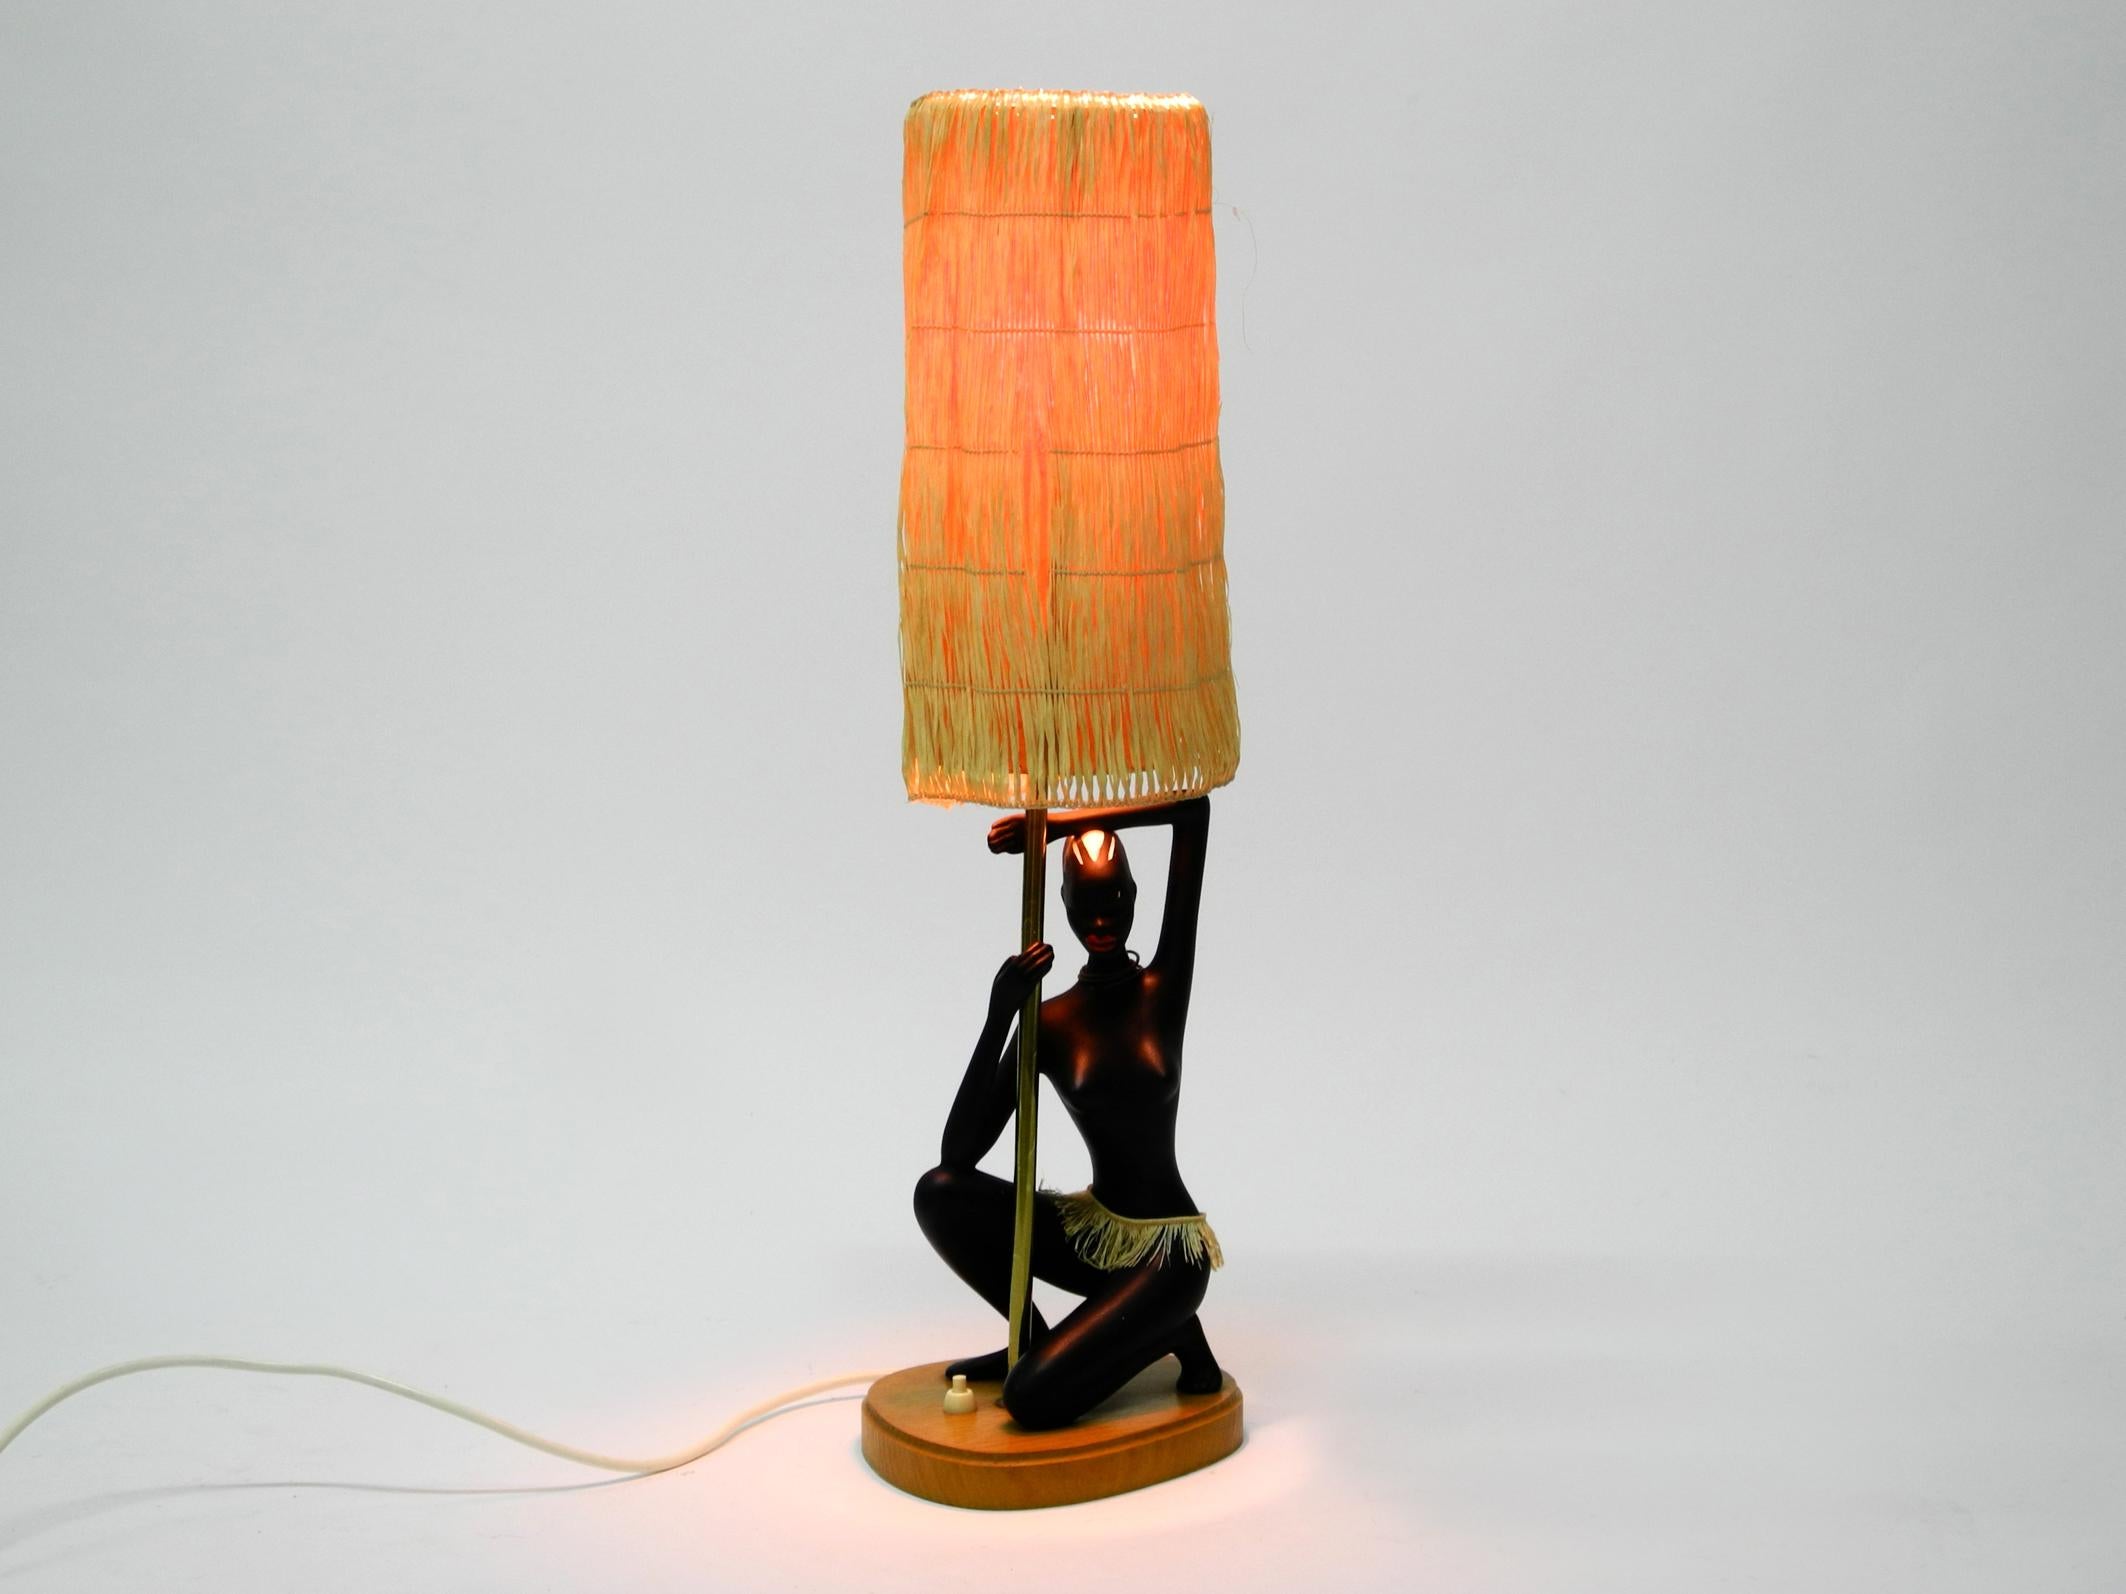 Very Rare Original Midcentury Ceramic Figurativ Table Lamp by Cortendorf  For Sale at 1stDibs